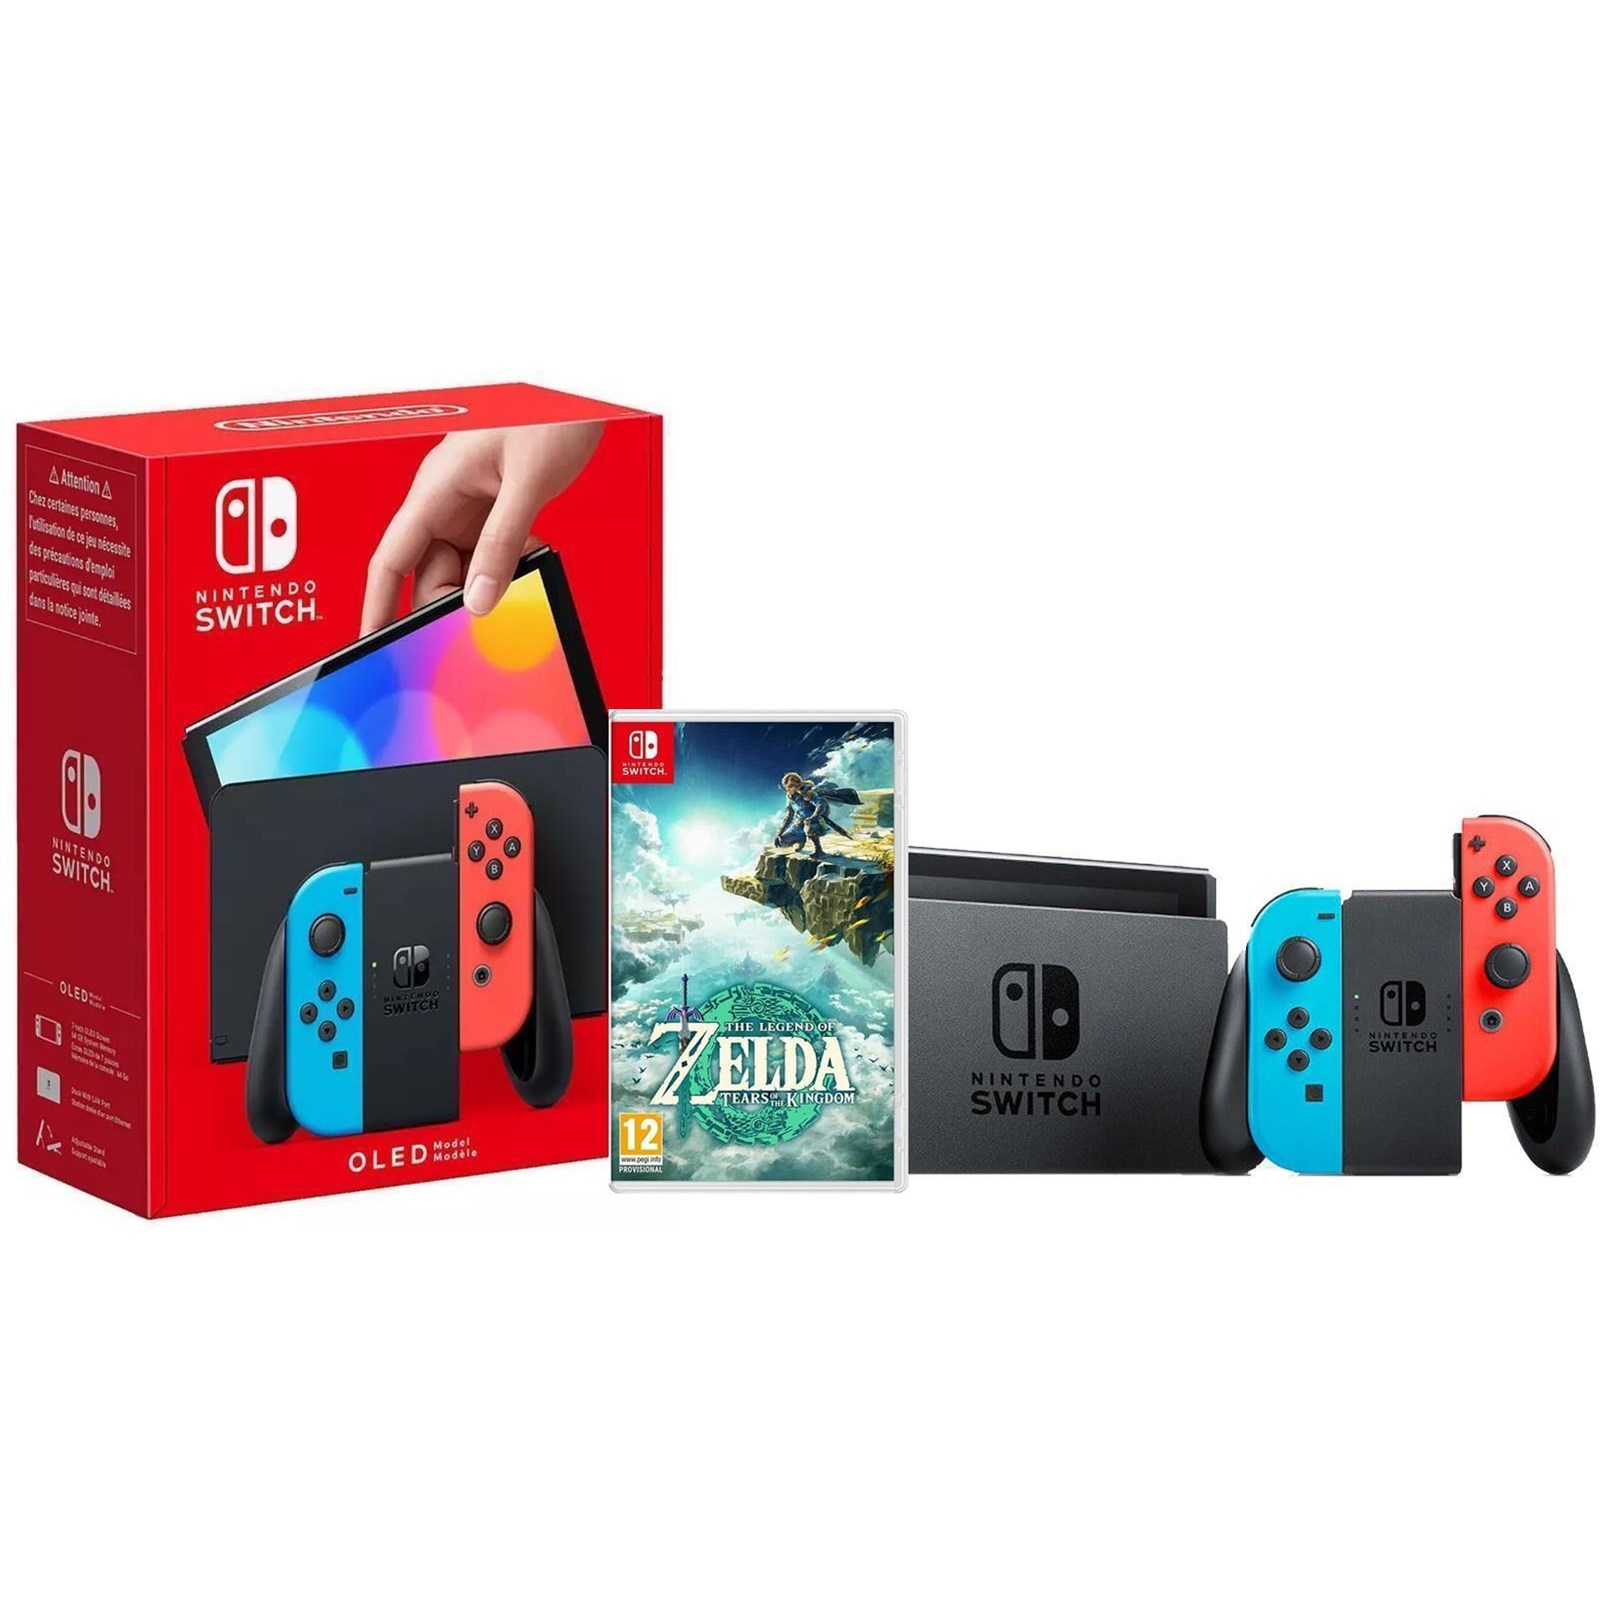 Nintendo Switch OLED Console - Neon Blue/Neon Red + The Legend of